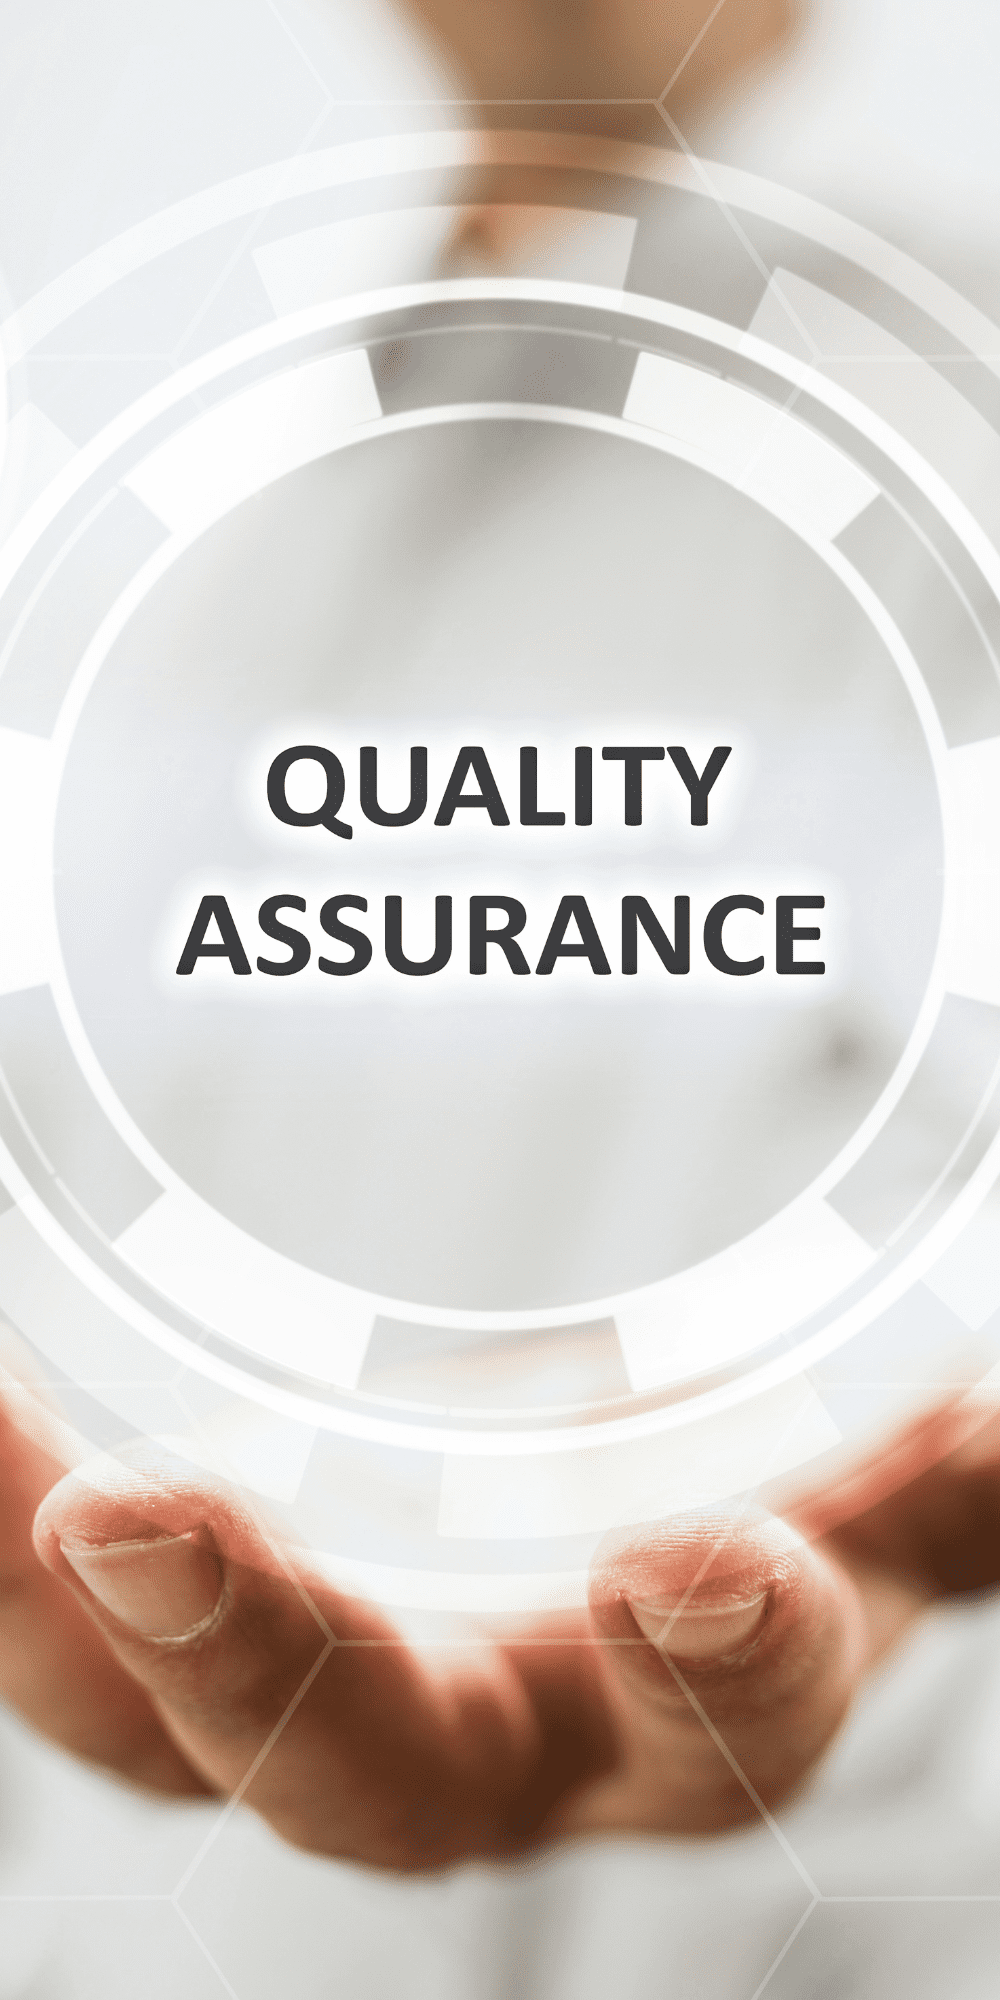 document scanning quality assurance being used by a company